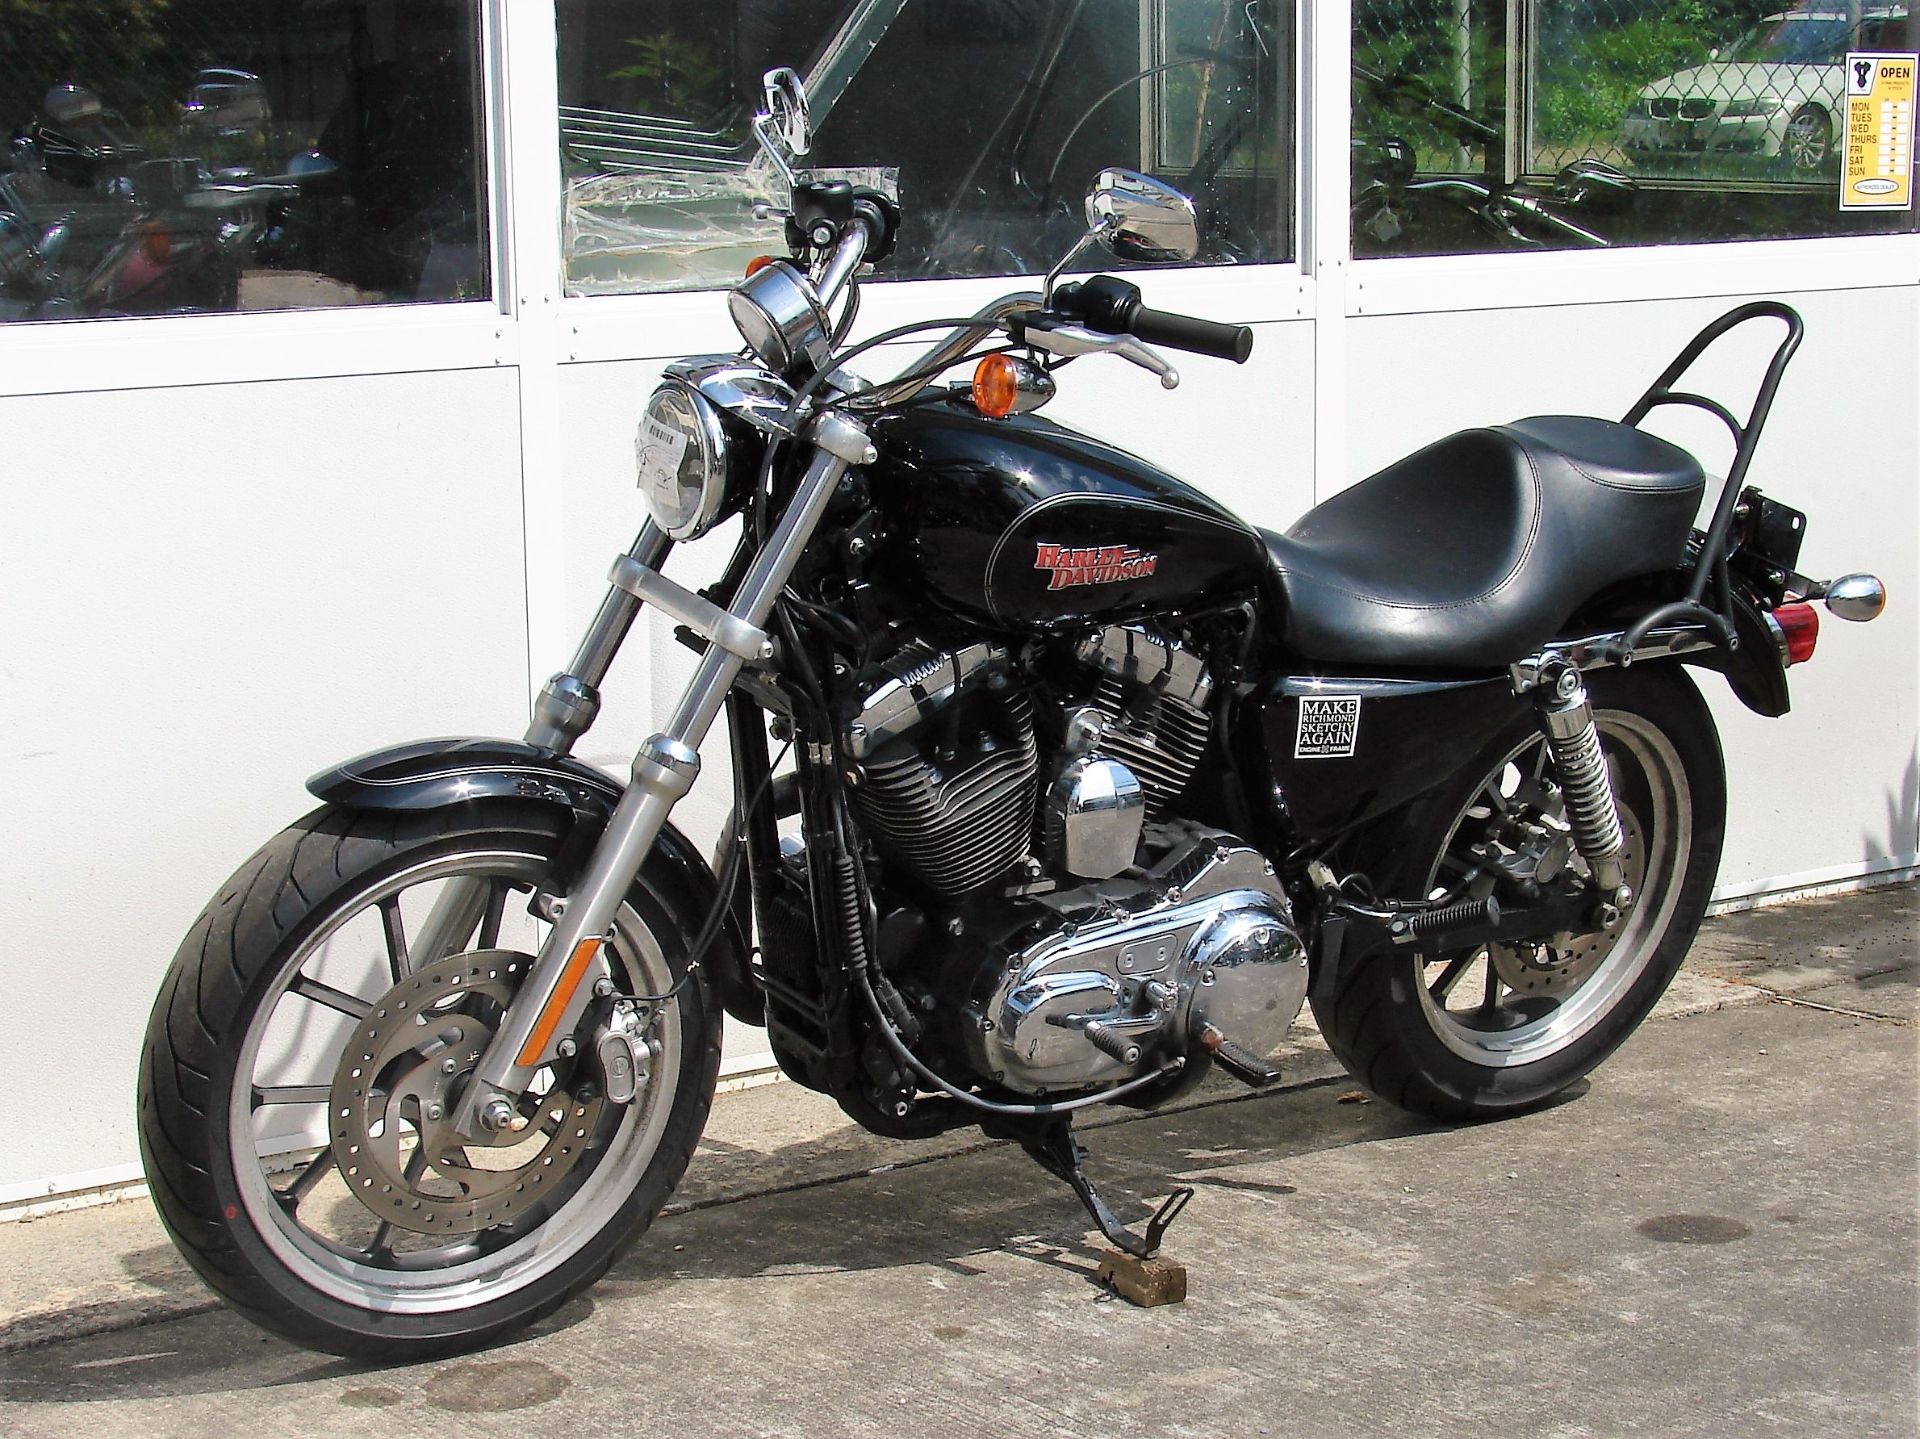 2014 Harley-Davidson XL 1200 T Super Low Sportster in Williamstown, New Jersey - Photo 18